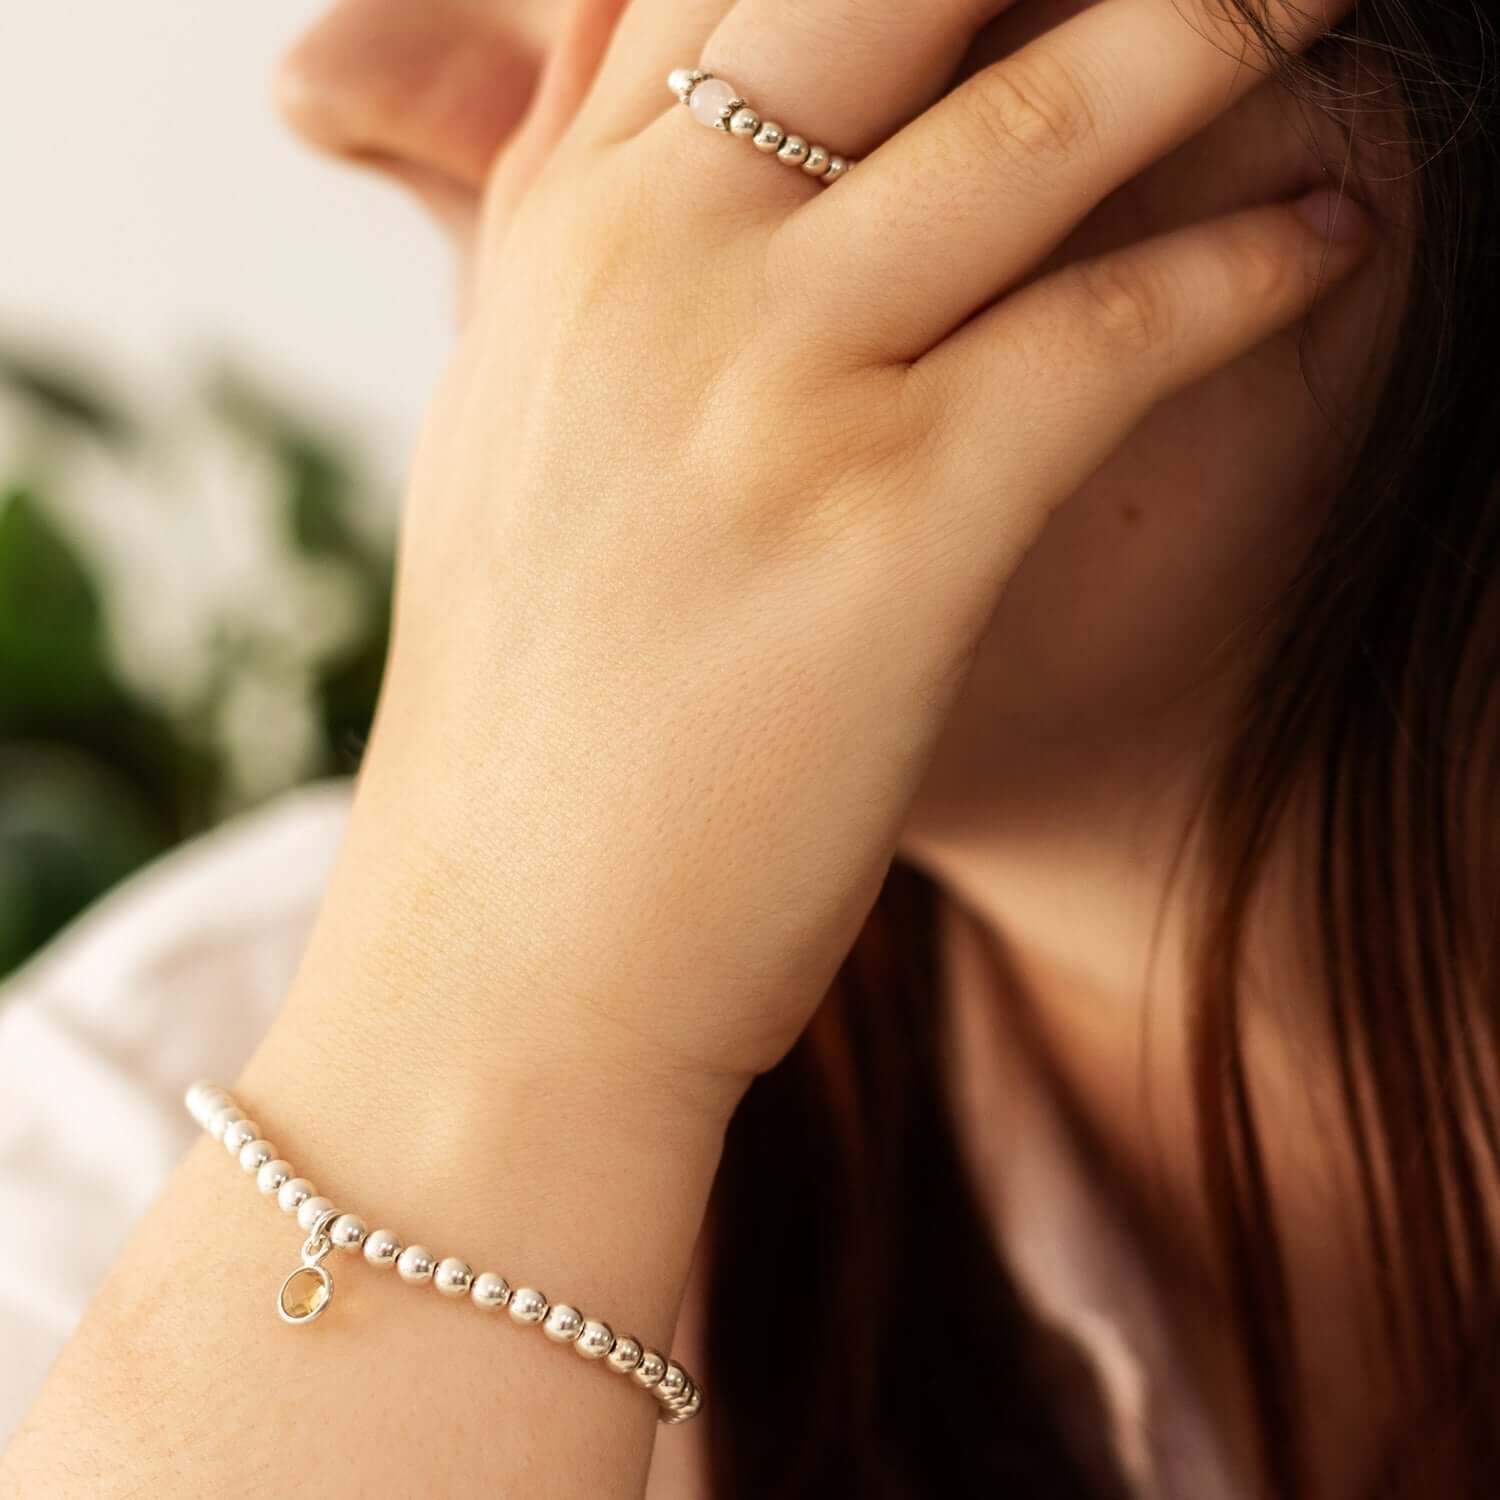 A close-up photo of a person wearing a bracelet on their wrist and a ring on their finger. Their hand touches the side of their face,with green plants blurred in the background, adding a serene touch to this November birthstone jewellery piece from the UK